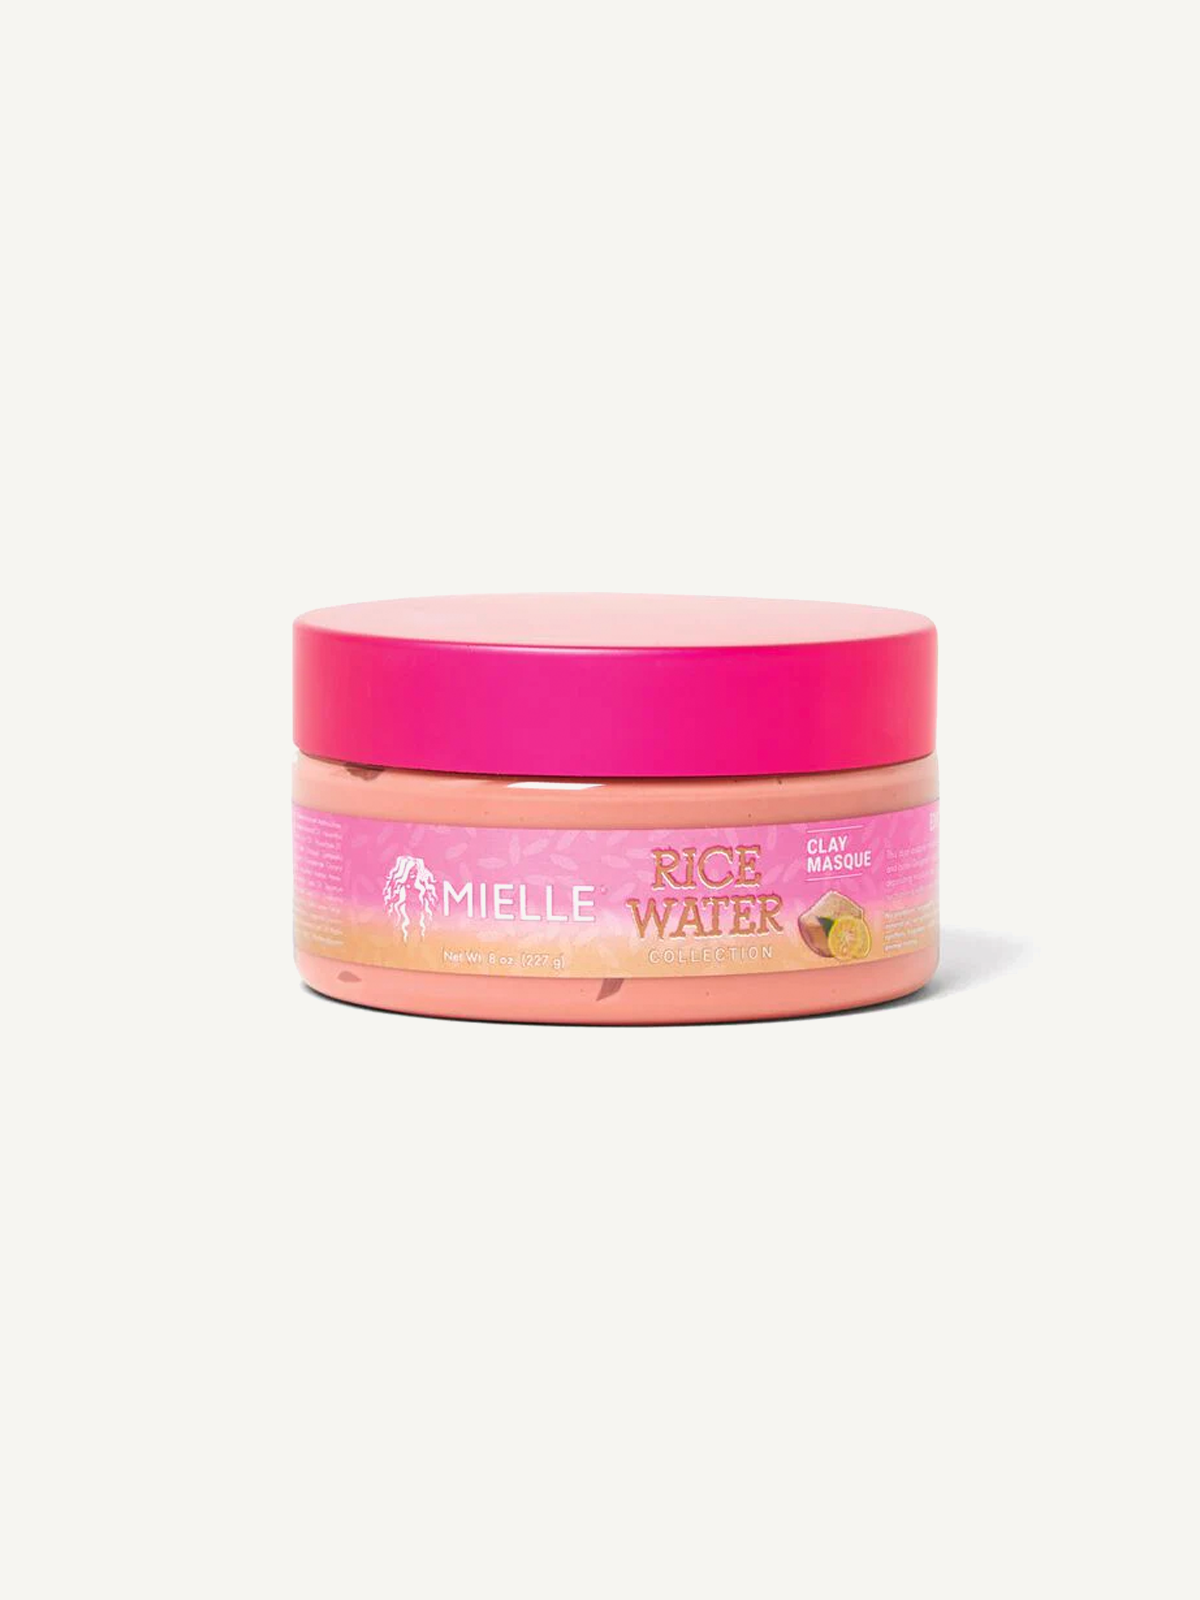 Mielle – Rice Water Clay Masque